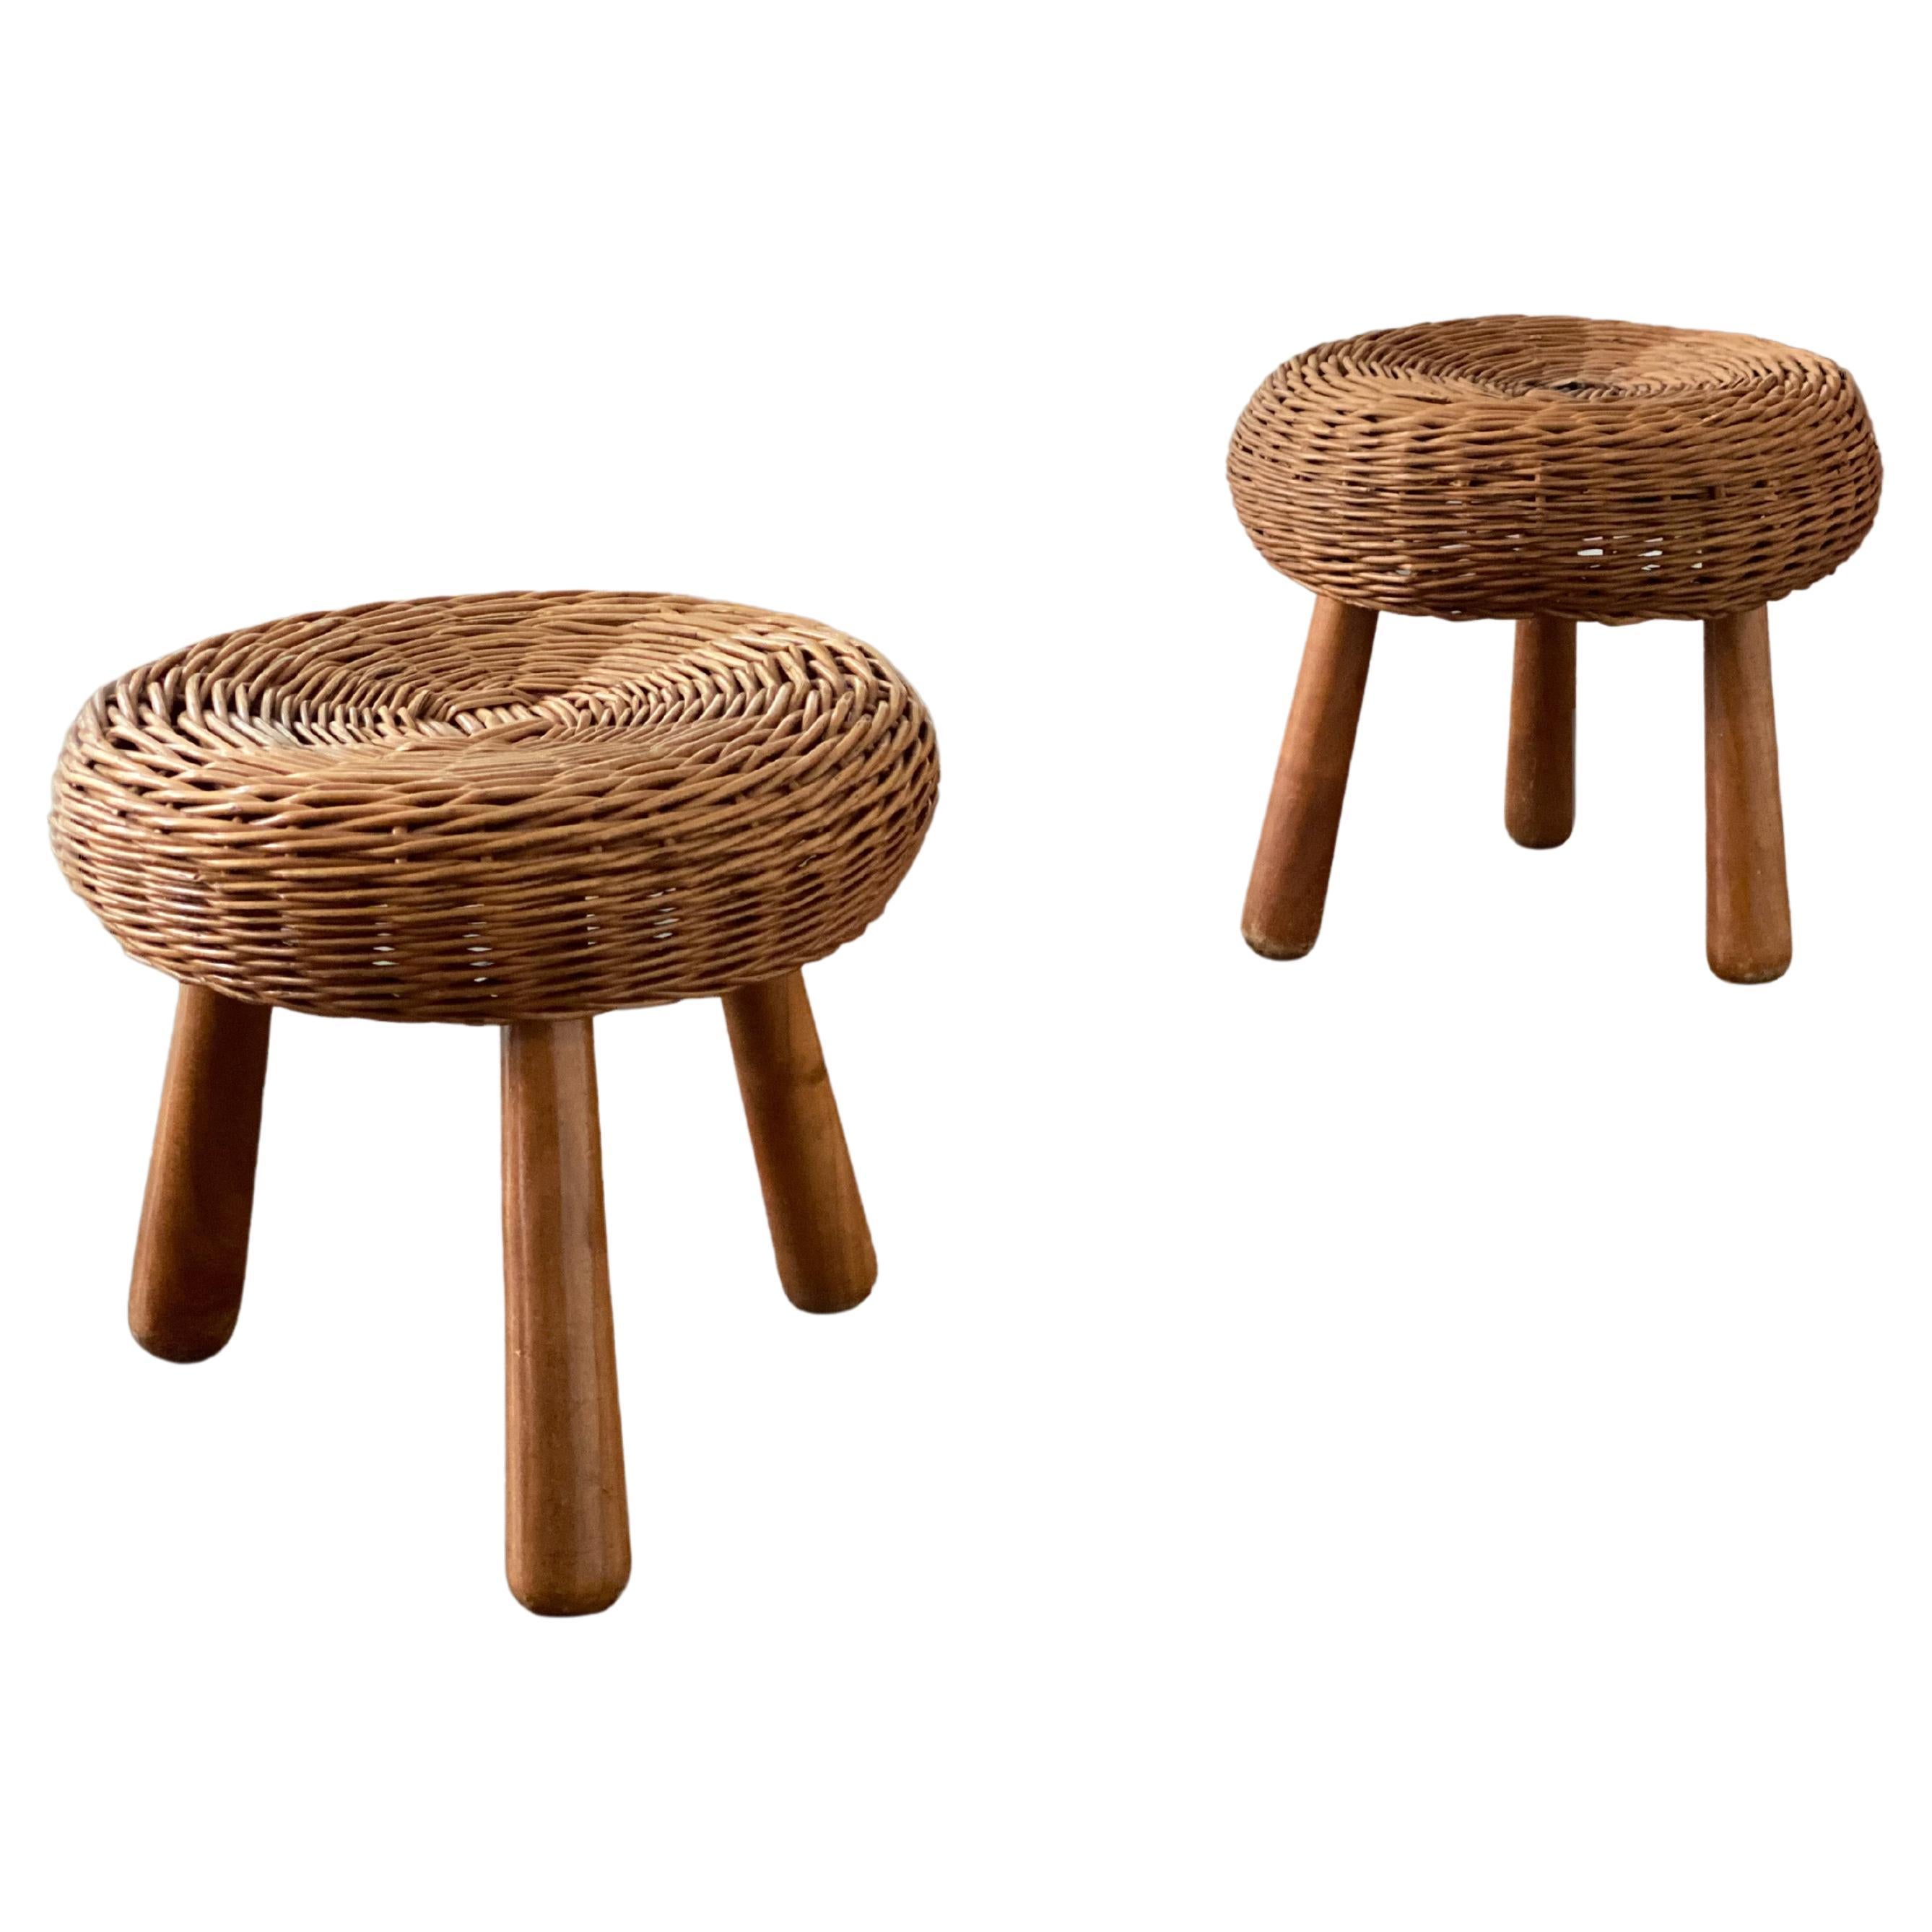 Pair of Woven Rattan Stools Attributed to Tony Paul